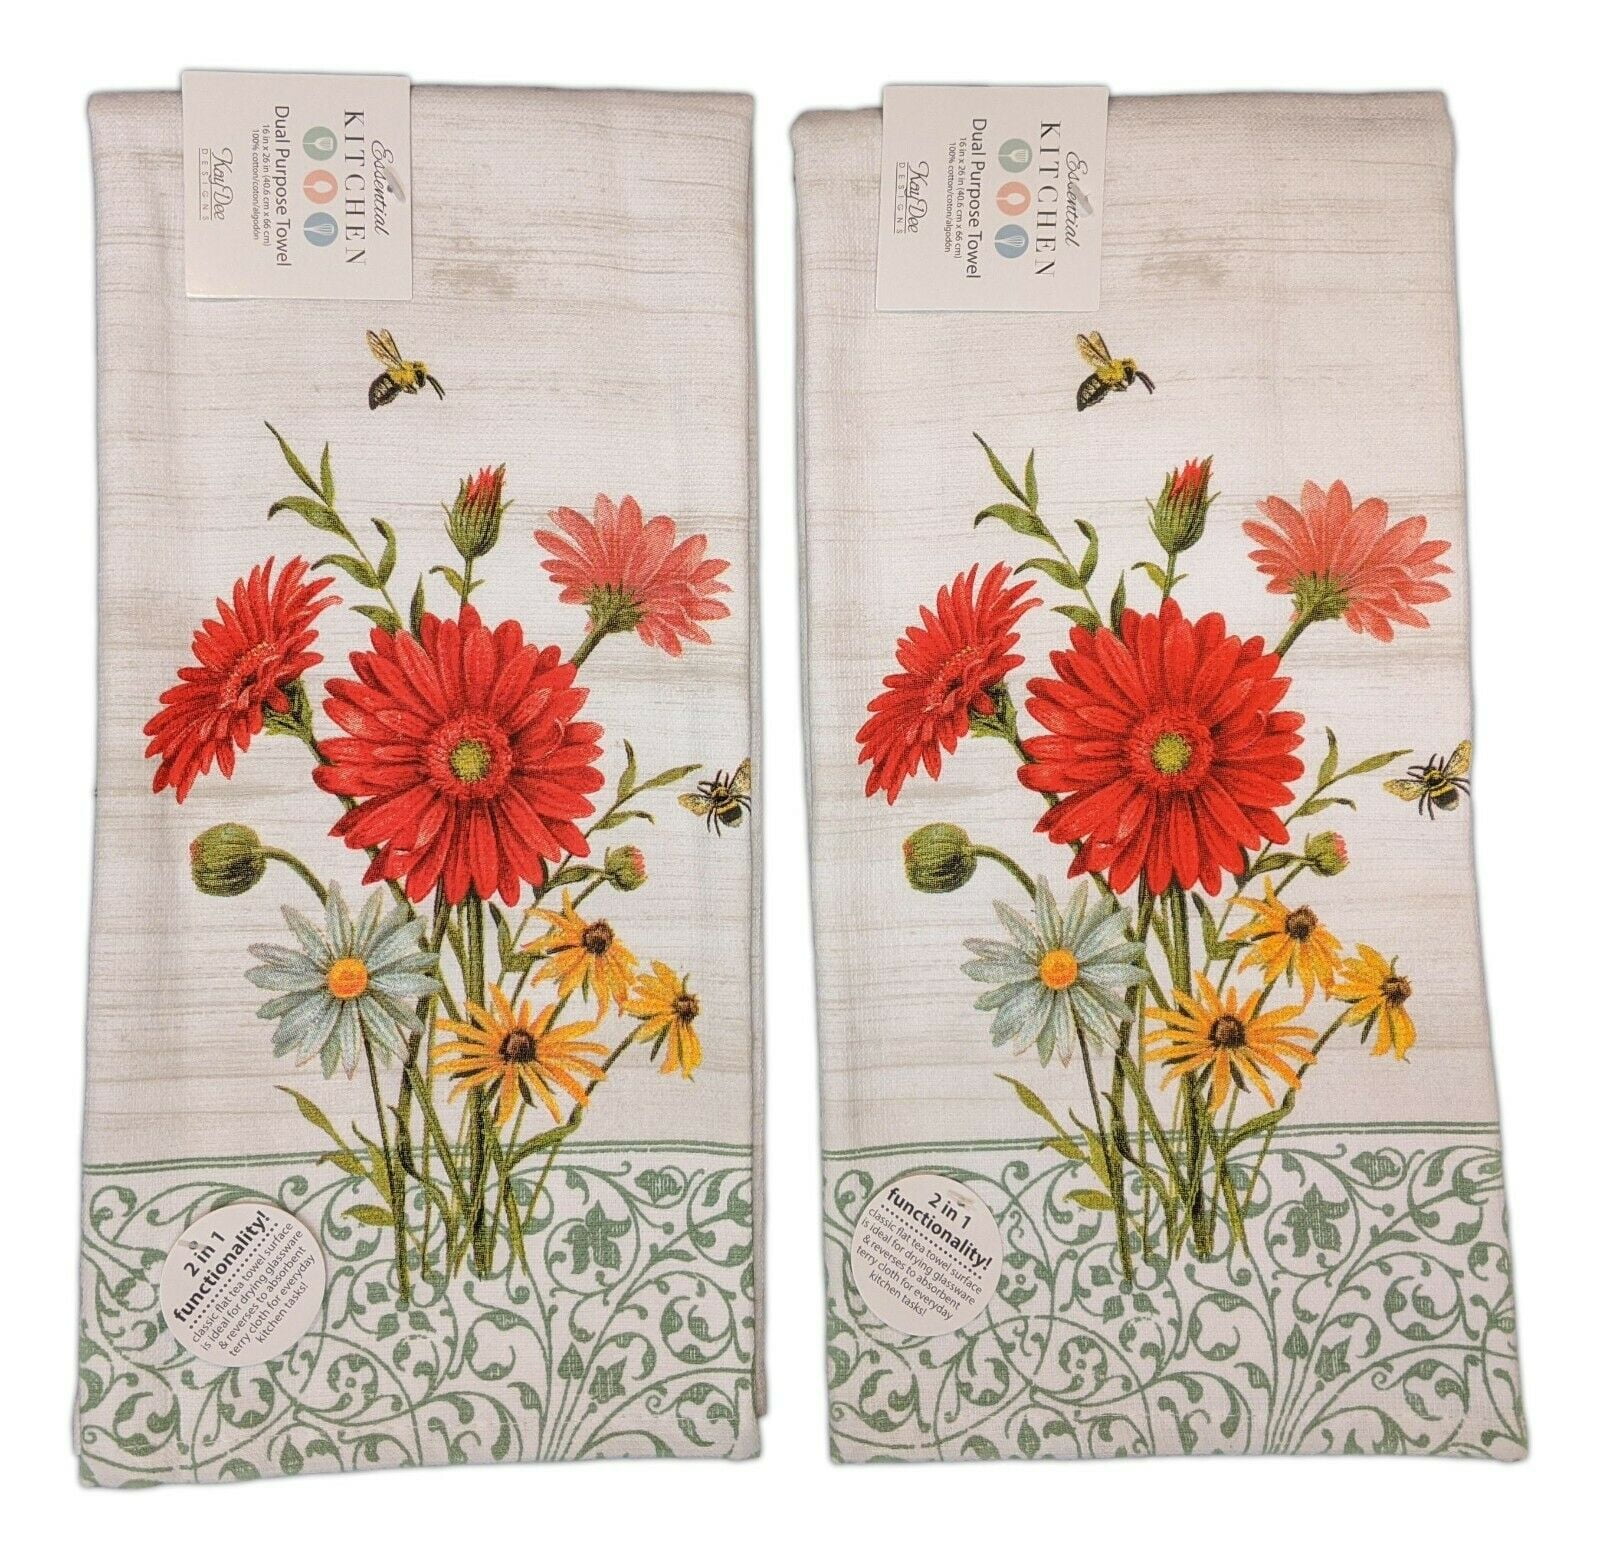 Kitchen Towels Set Of 2 dish hand Bright Yellow Gold & Black Flowers on  white